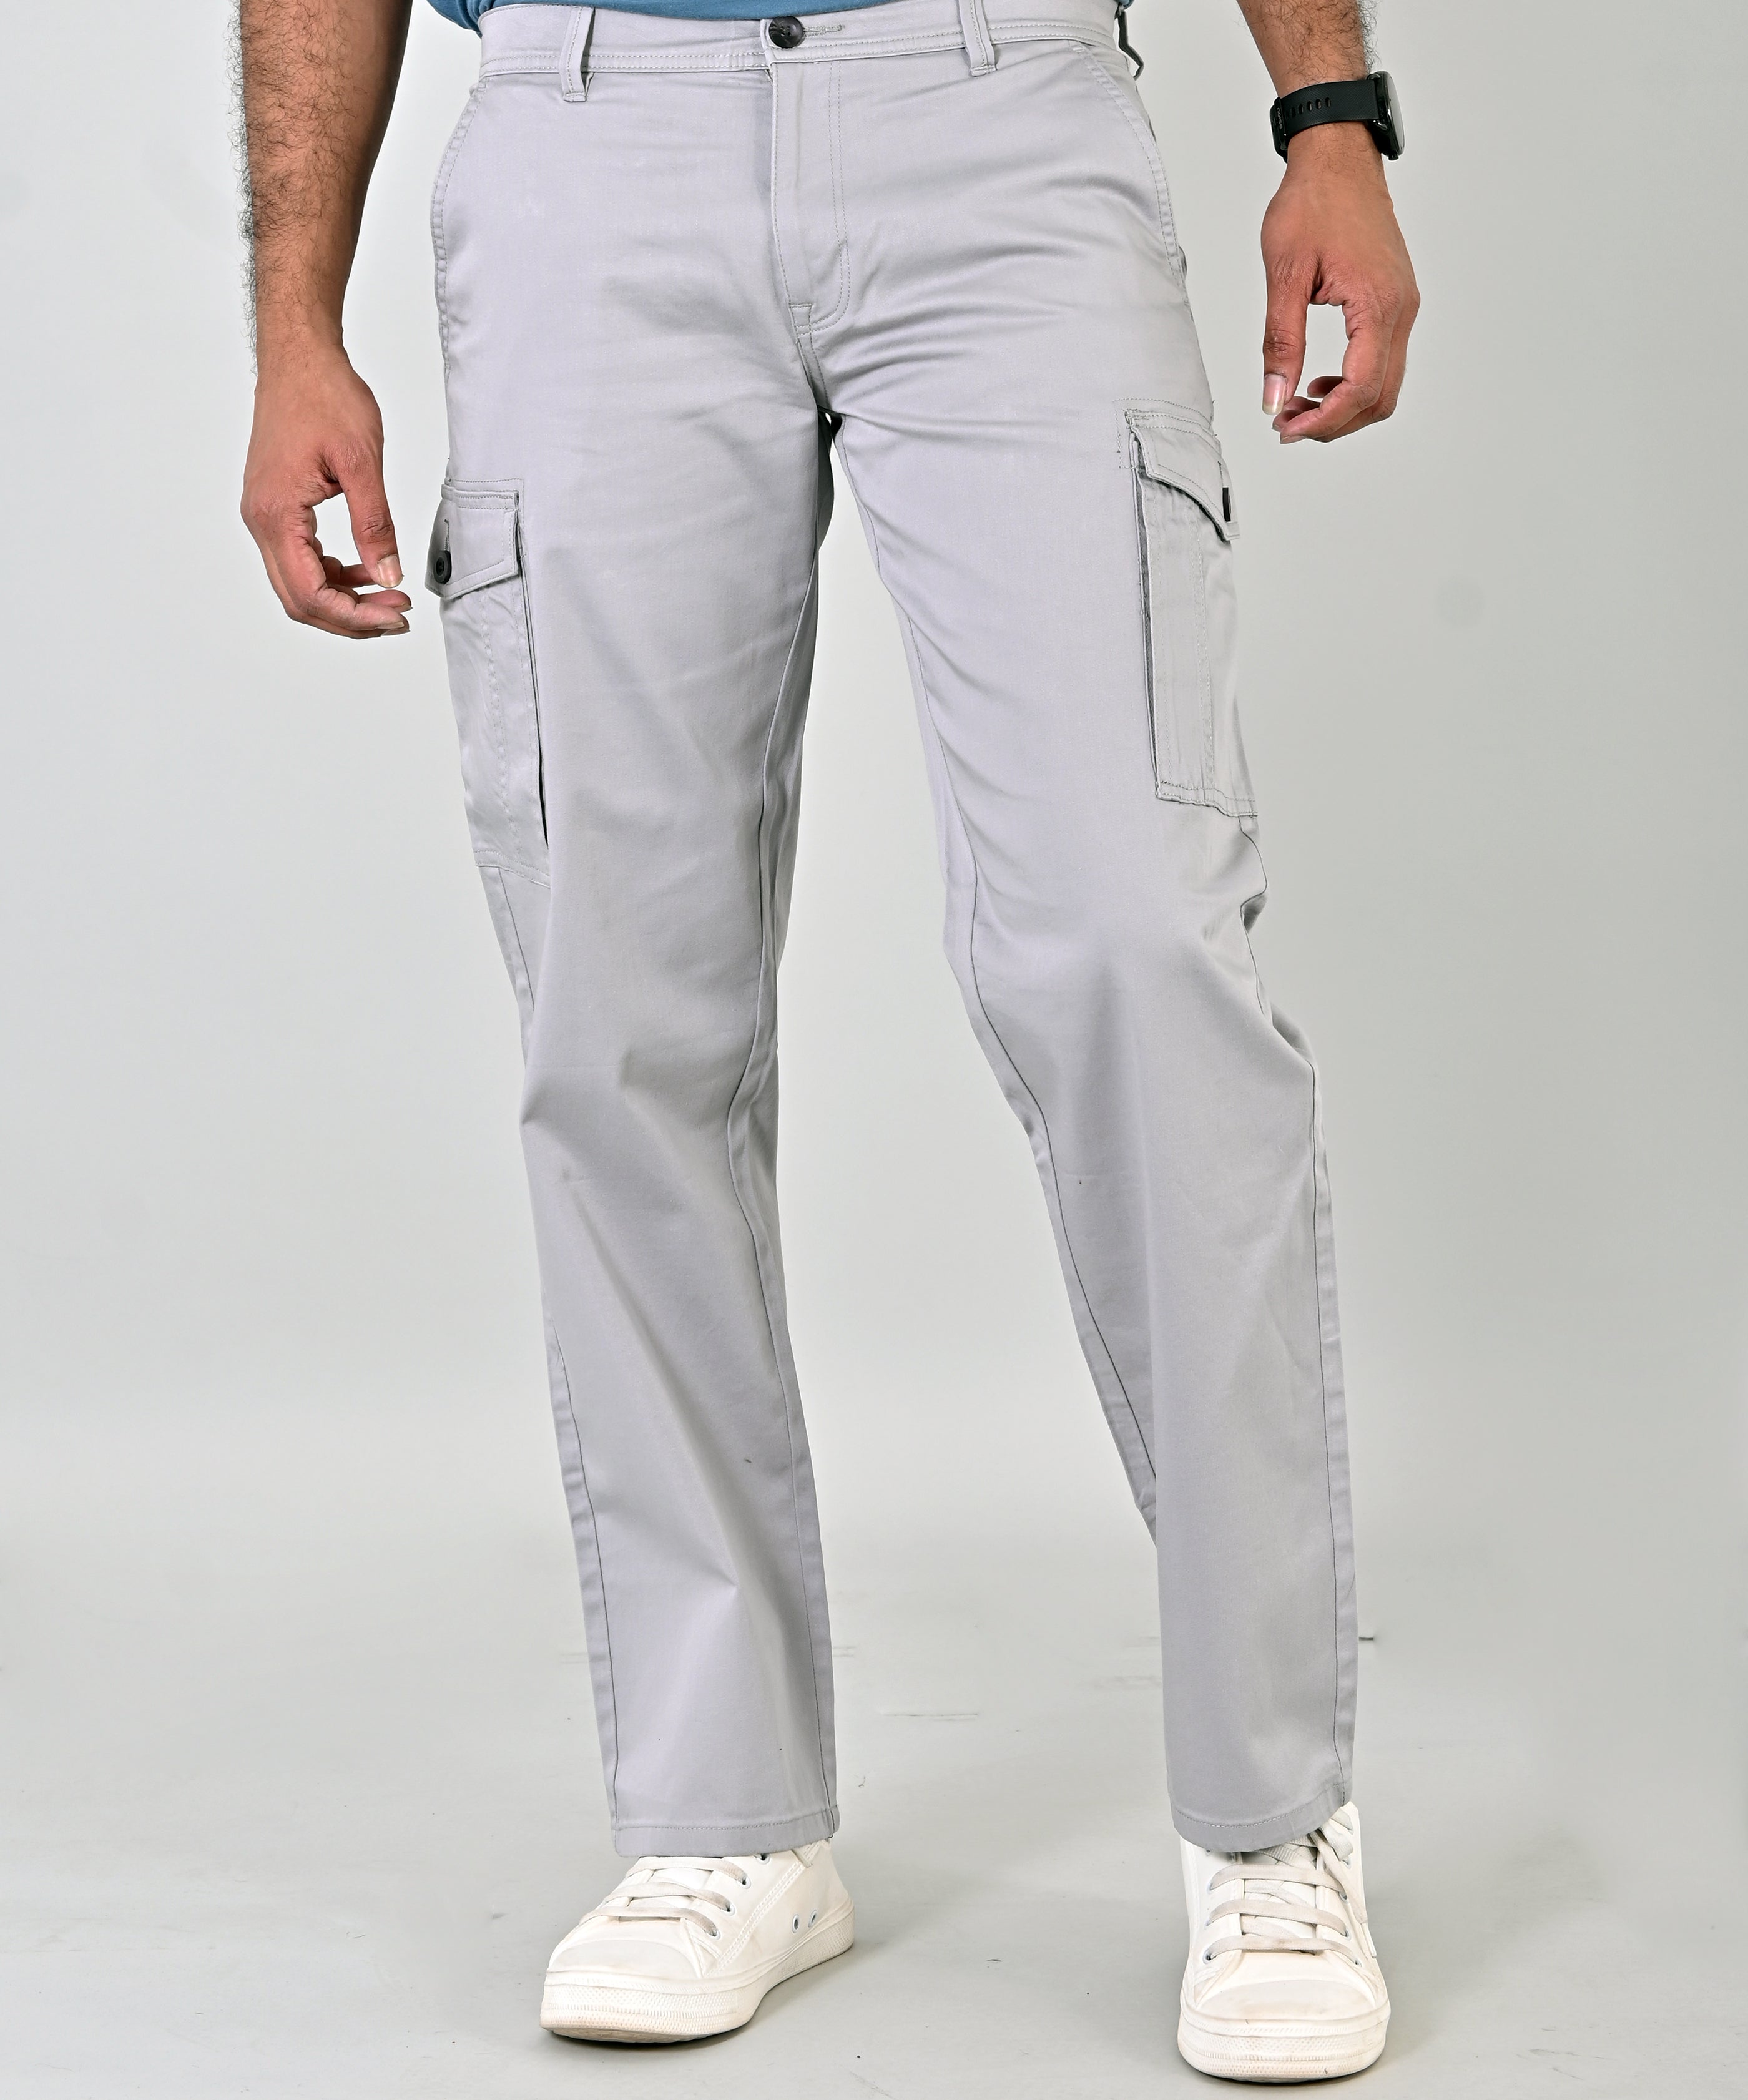 Buy Ephemeral Men's Regular Fit Cotton Cargo Pant (Assorted_L) at Amazon.in